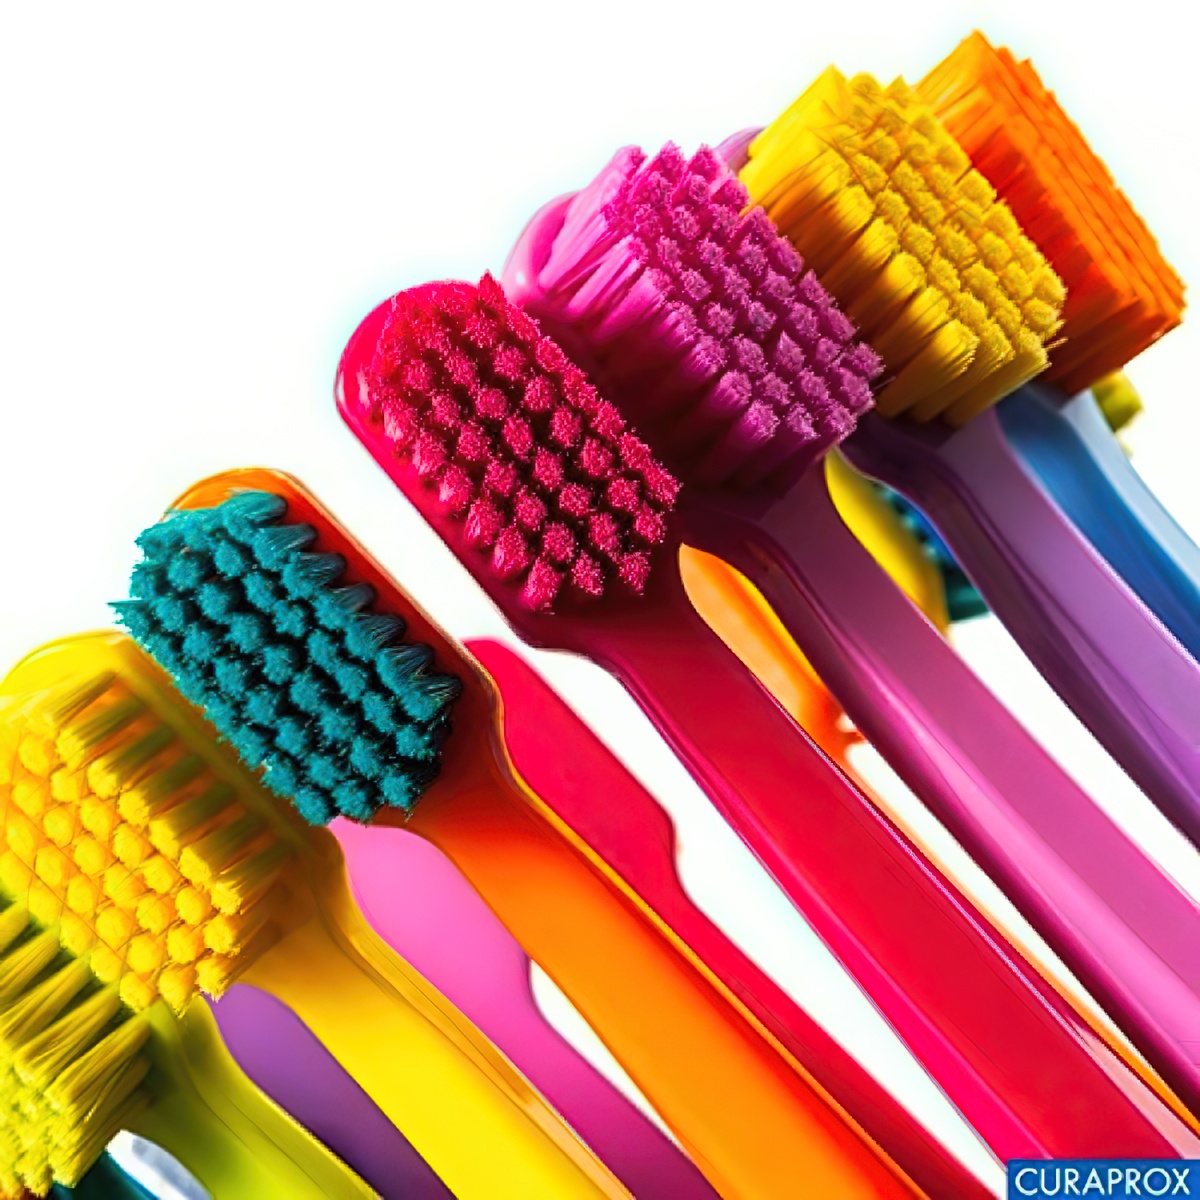 What to look for in a manual toothbrush - Willow Pass Dental Care - Concord, CA